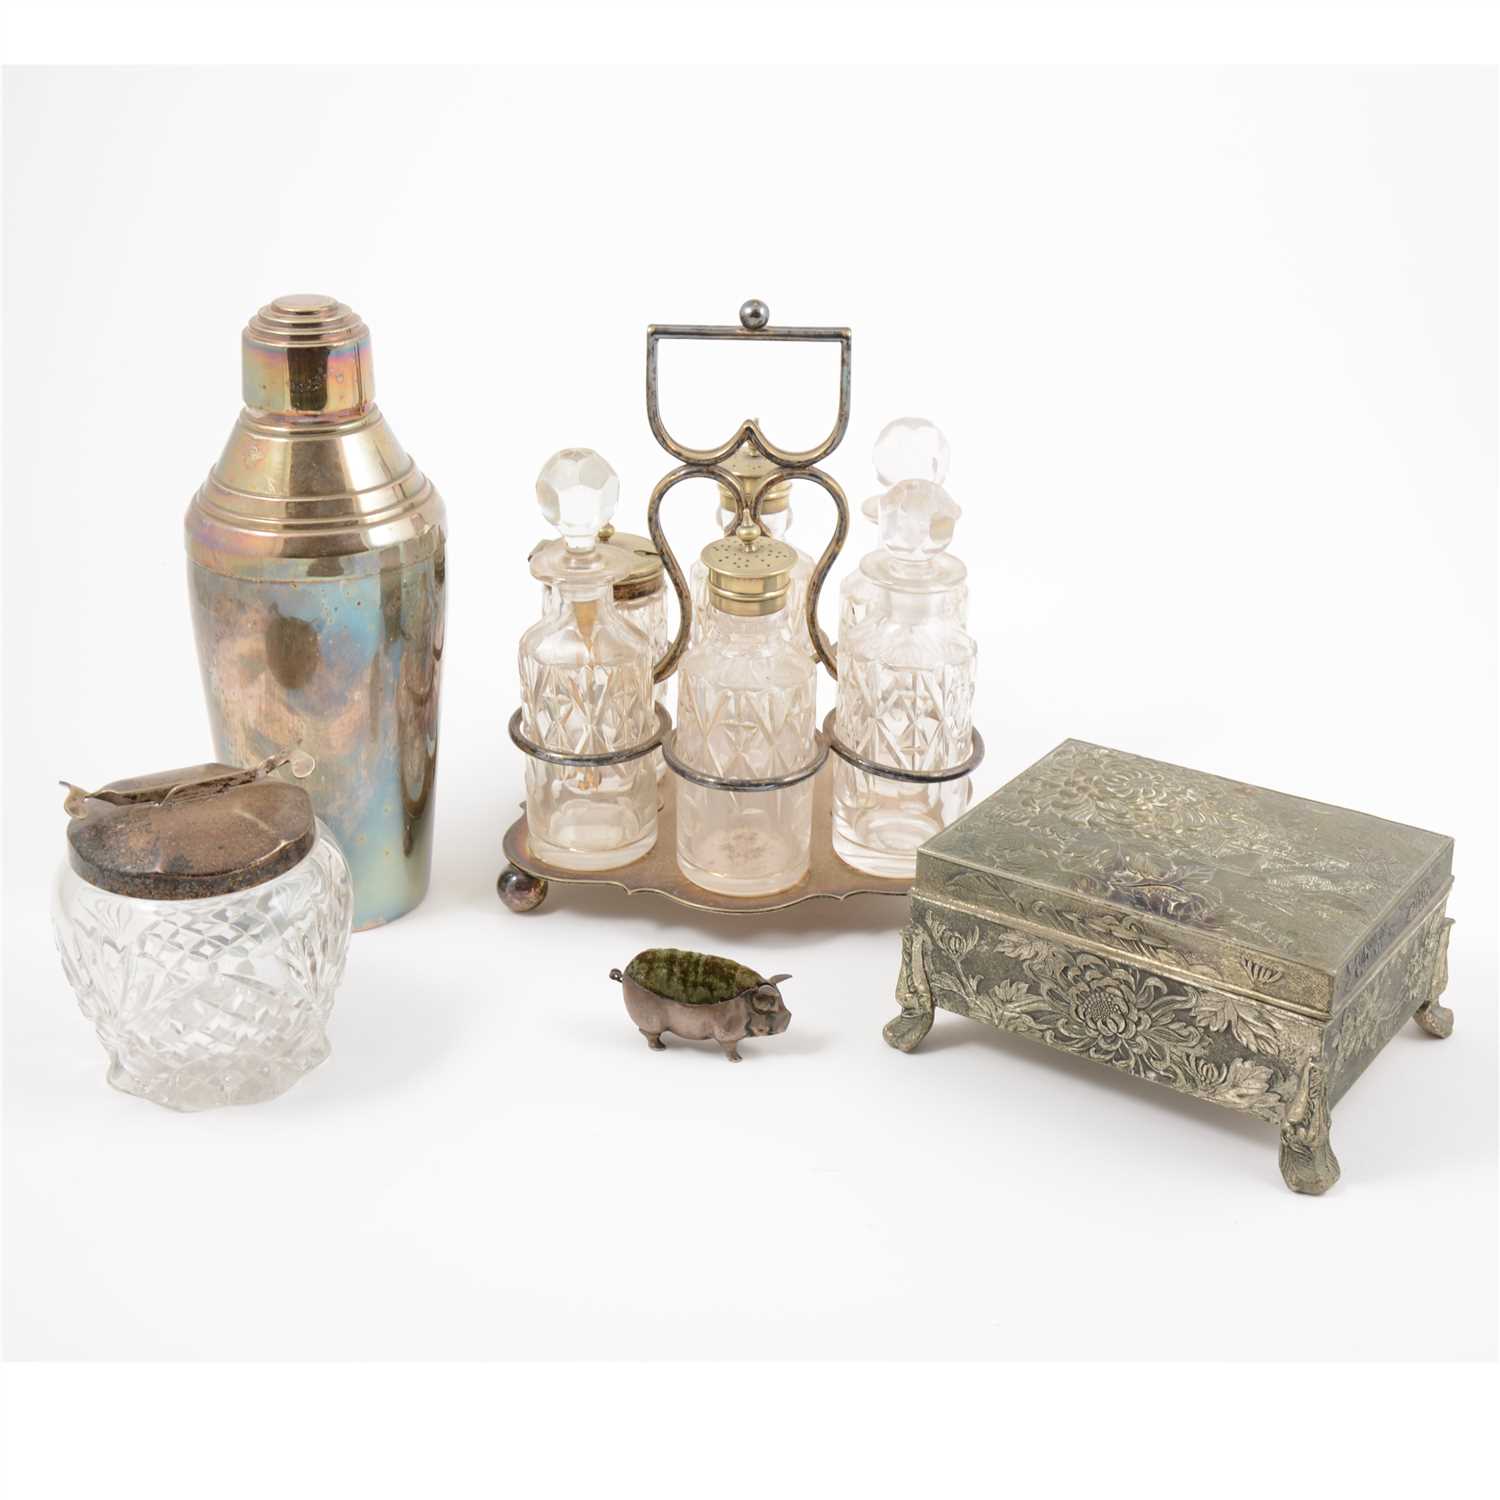 Lot 12 - A quantity of silver and silver-plated items, including a silver pig pin cushion (a/f)